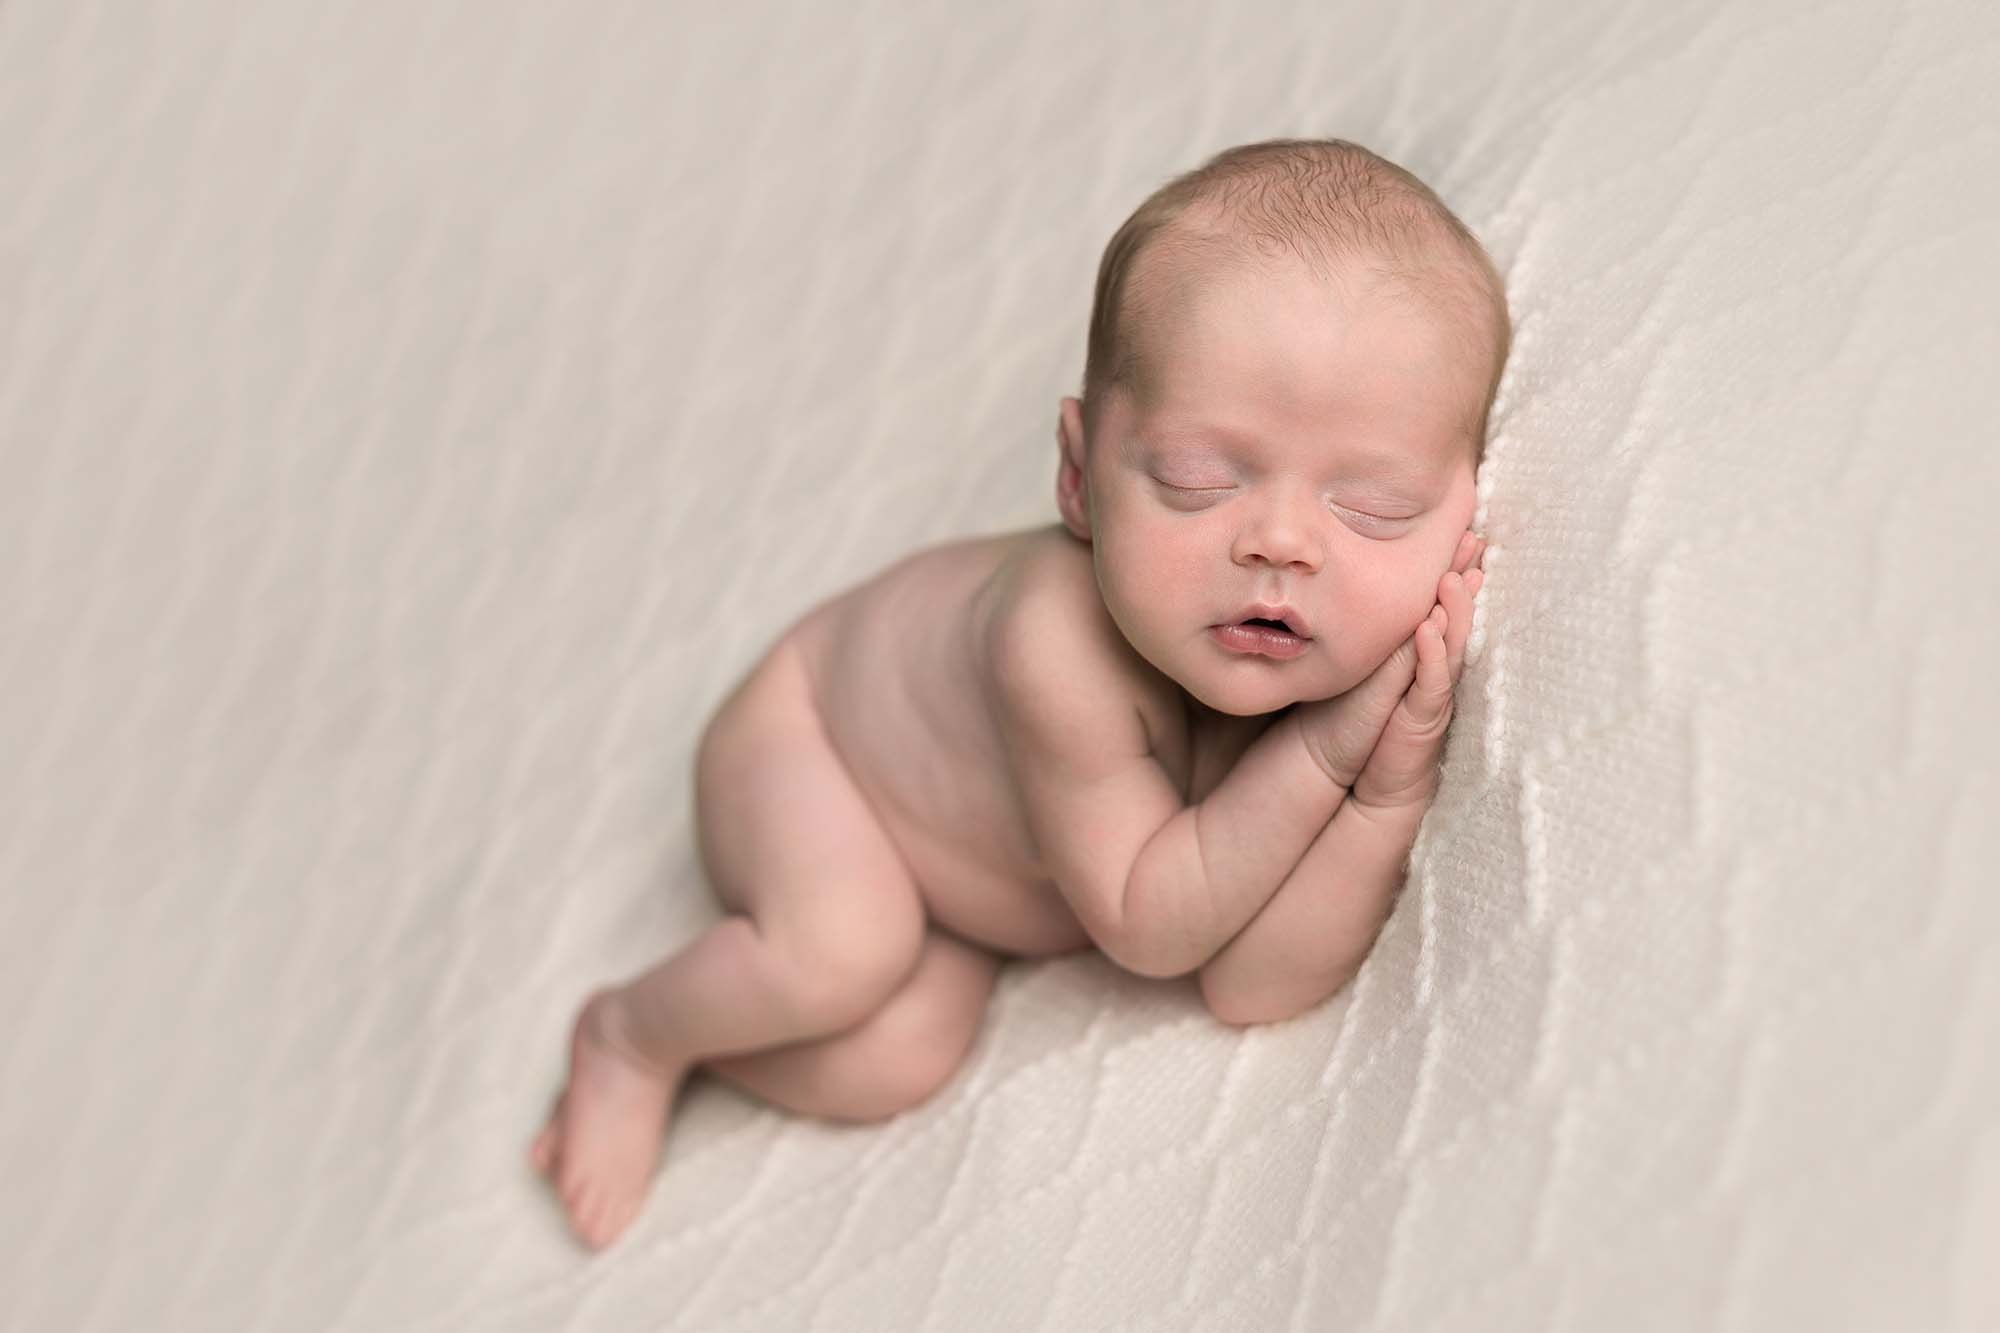 Baby lying on his side on a diamond cream blanket sleeping. Image taken by Newborn photographer in Glasgow during baby photoshoot